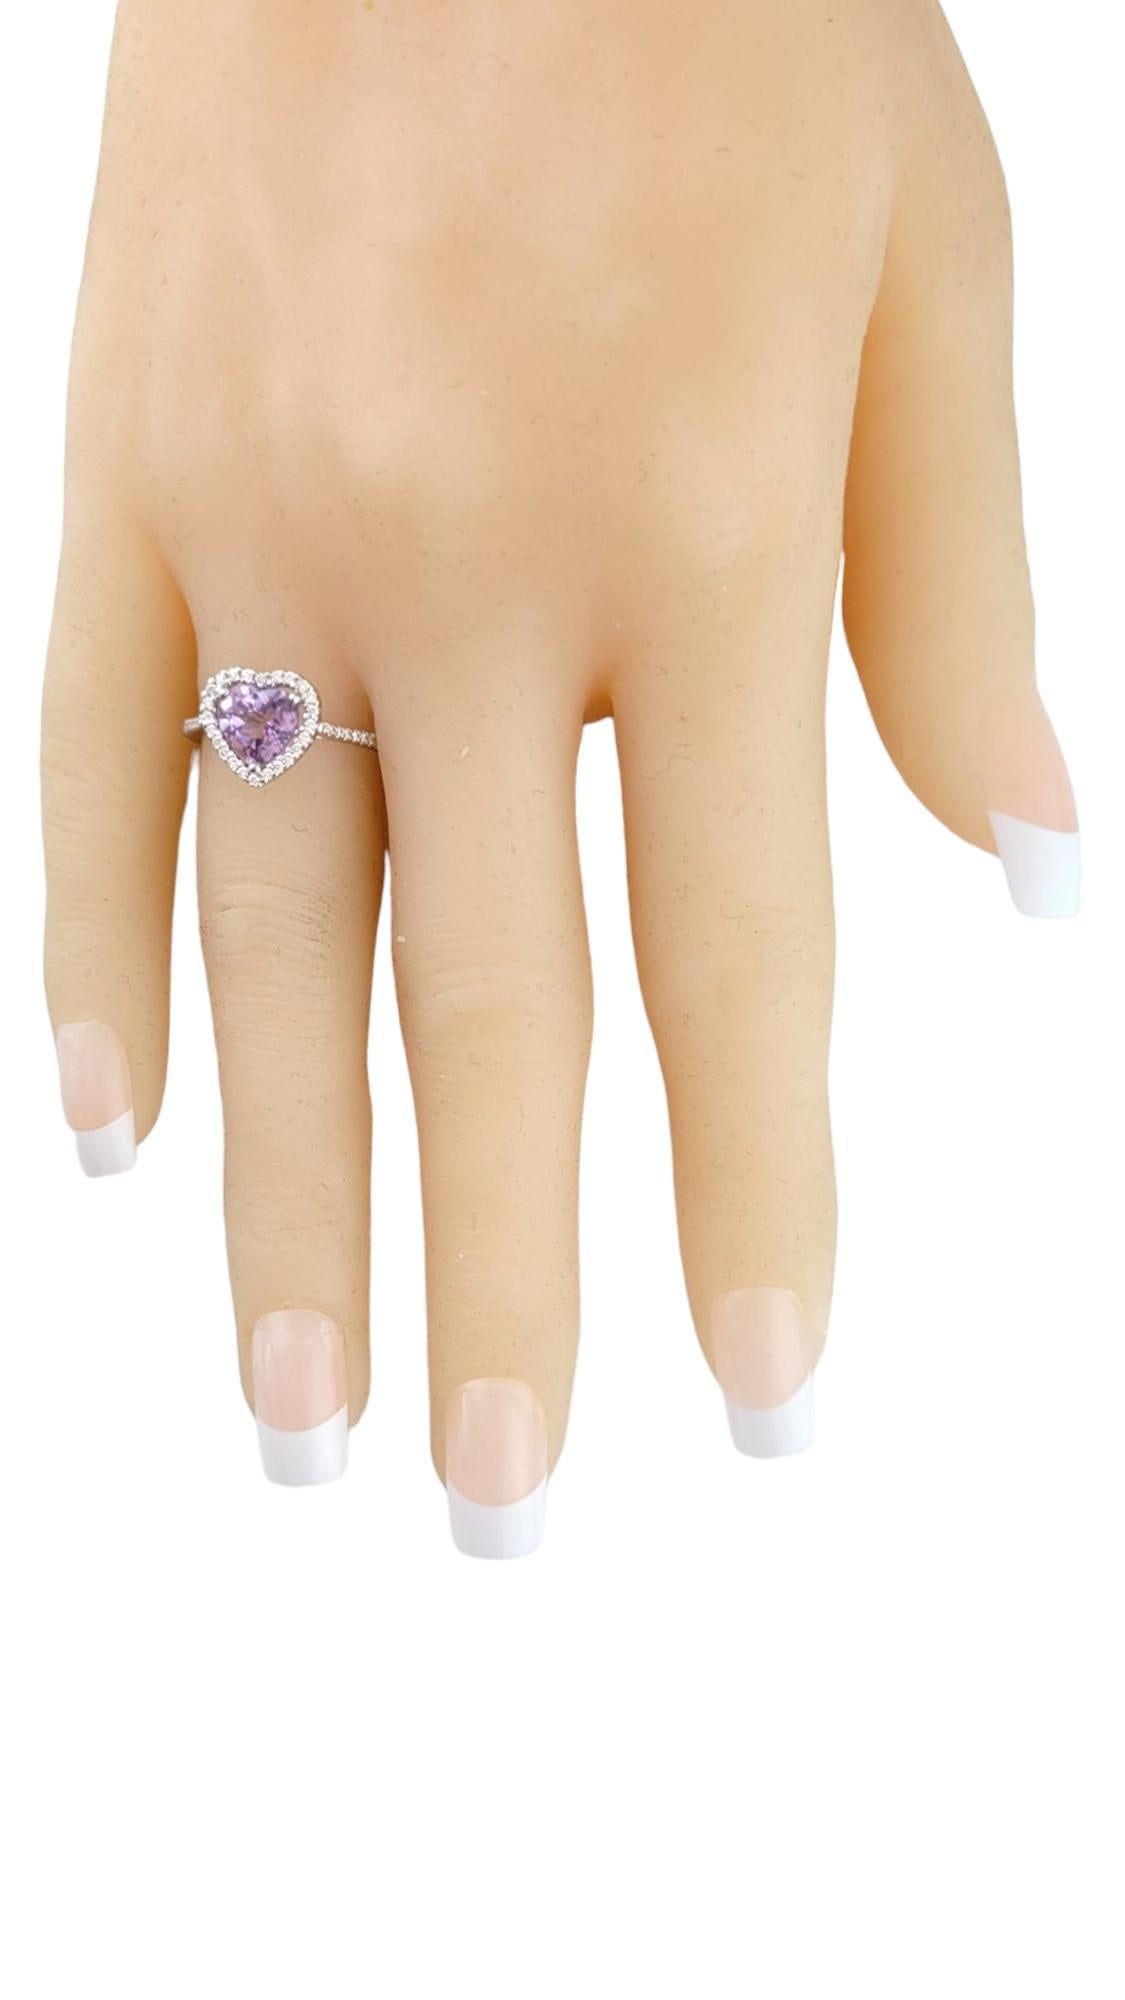 18K White Gold Diamond & Amethyst Heart Halo Ring Size 6.5 #16289 For Sale 1